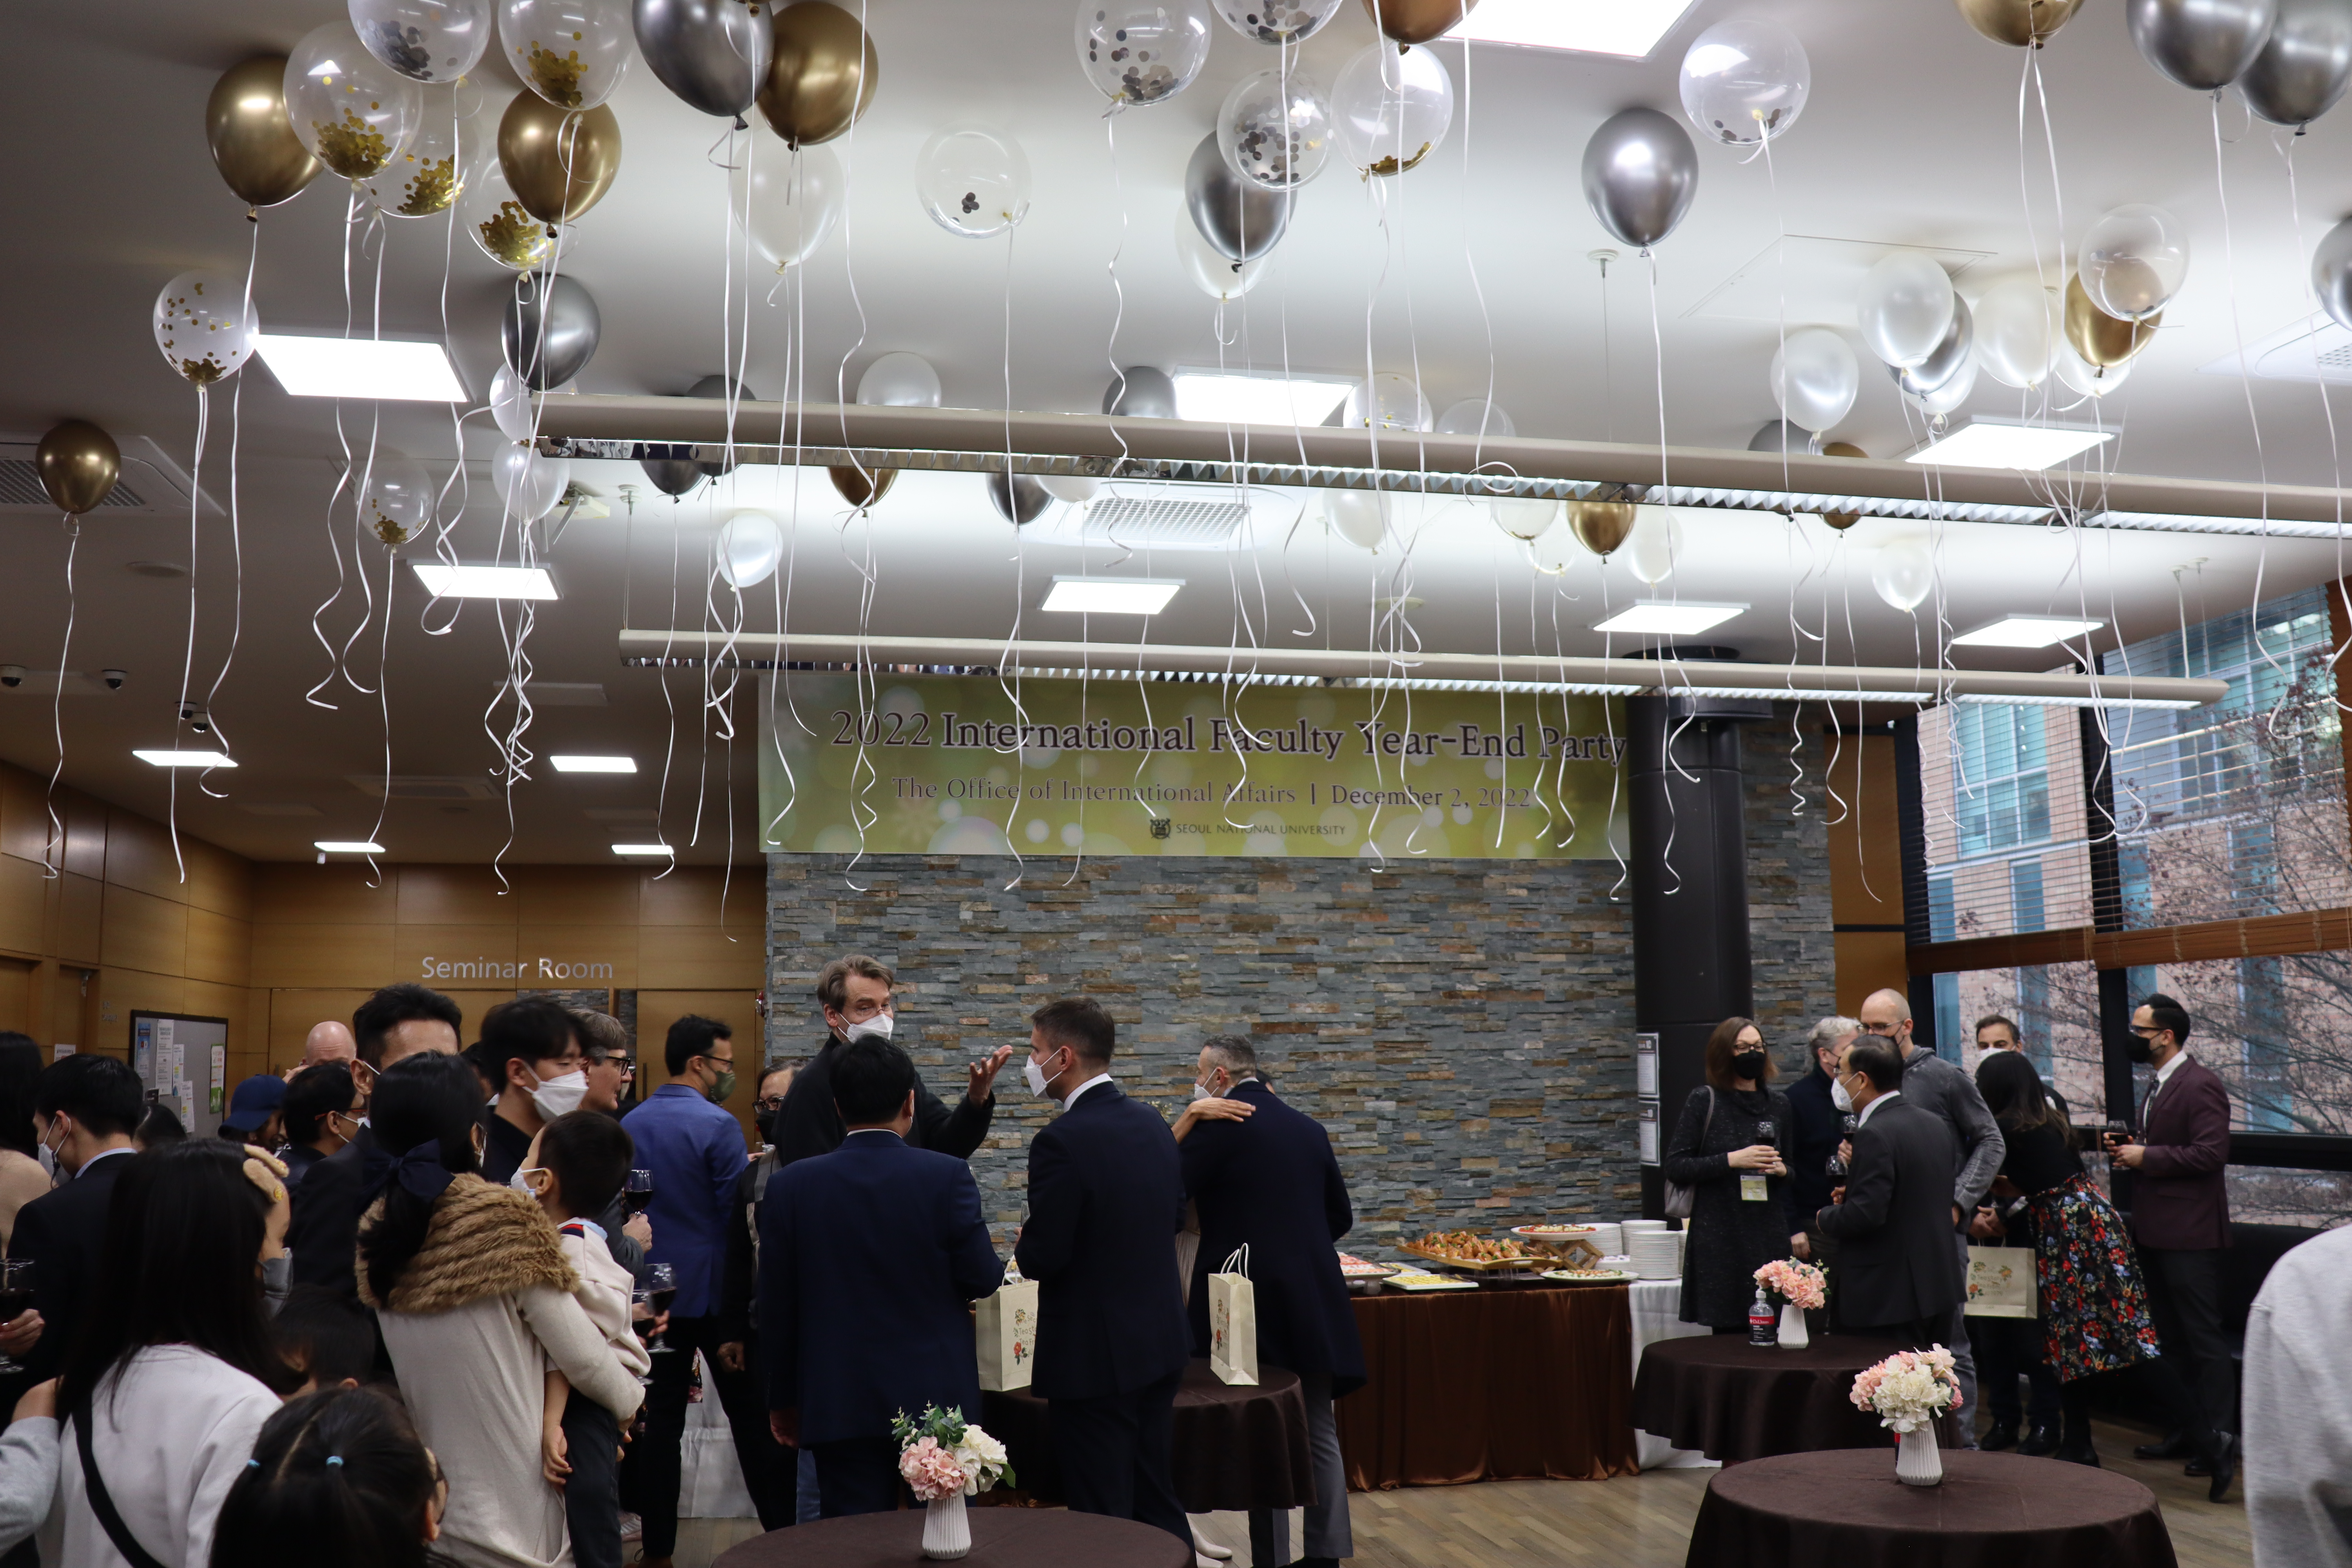 2022 International Faculty Year-End Party 